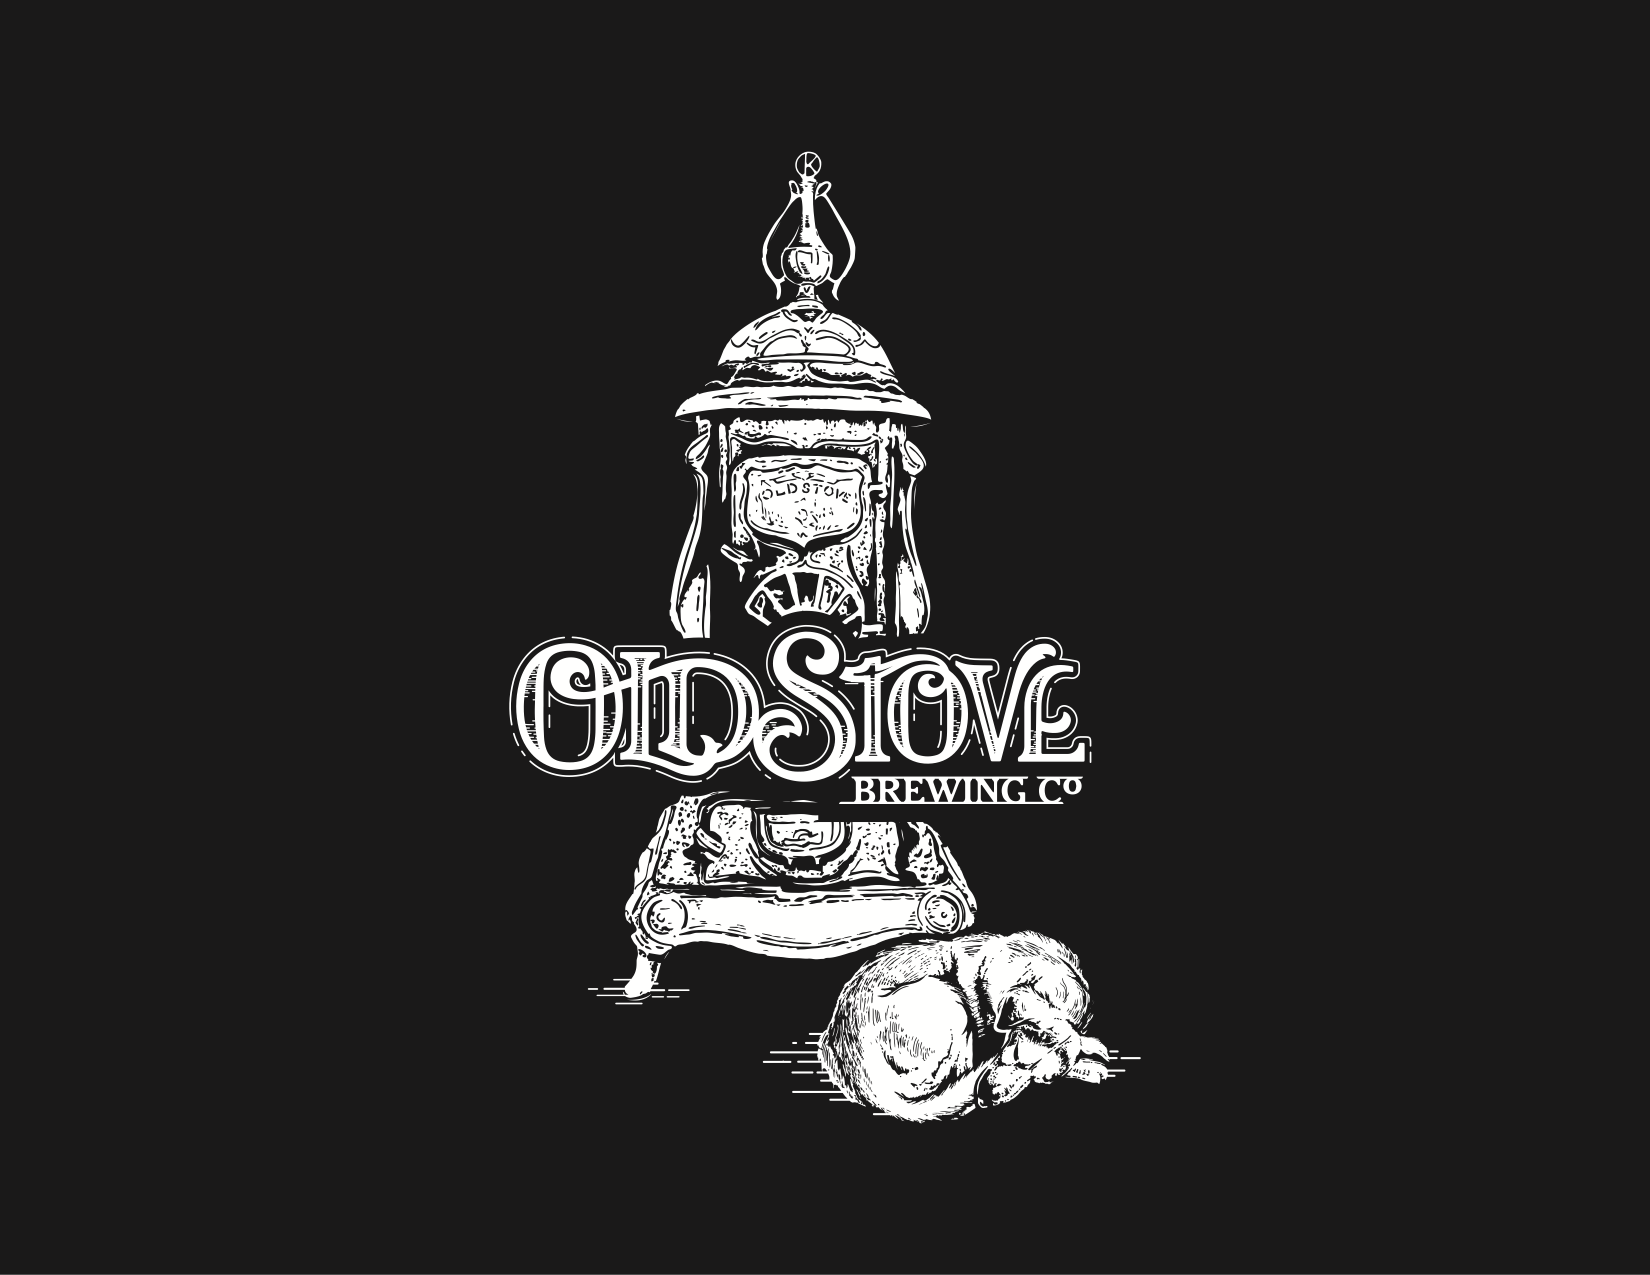 Business logo of Old Stove Brewing